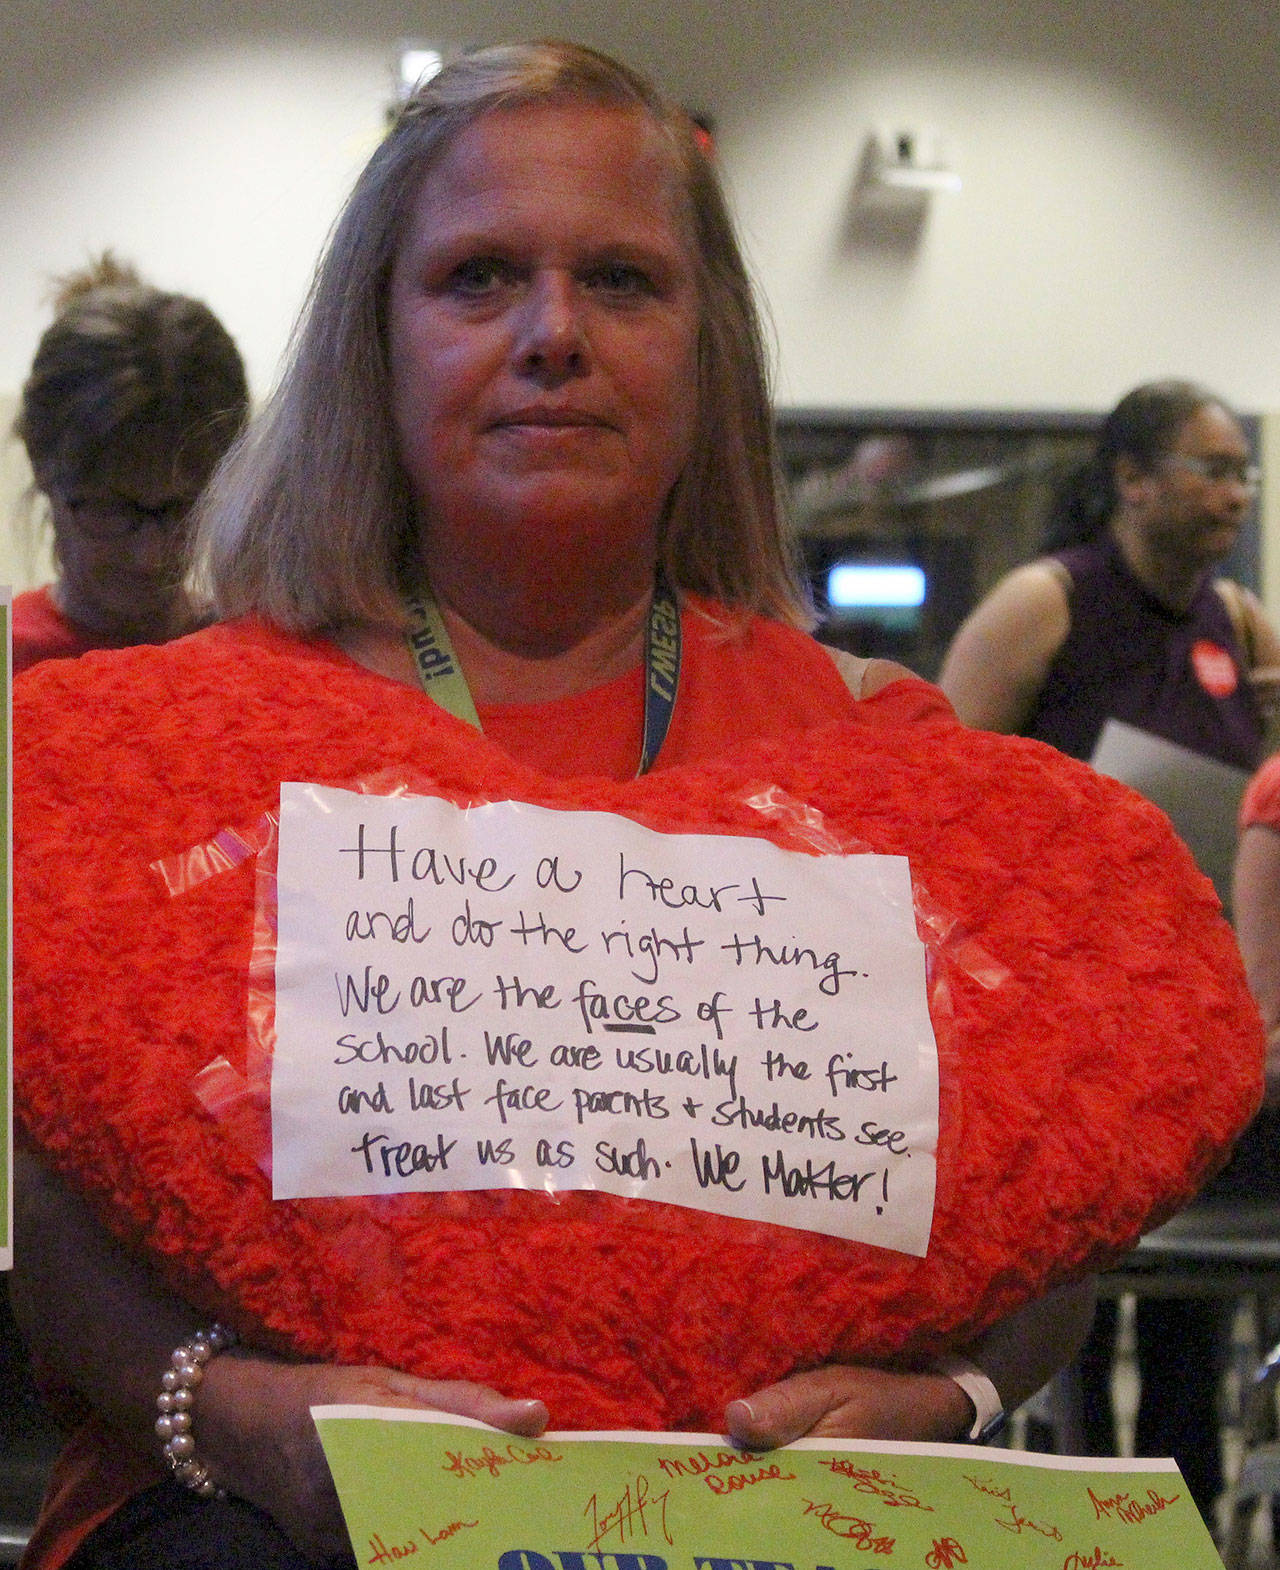 Peg Jatekar, a healthroom secretary at Laura Ingalls Wilder Elementary School, held a plush heart with a handwritten note attached at the school board meeting. The note read “Have a heart and do the right thing…We are the faces of the school. We are usually the first and last face parents and students see. Treat us as such. We matter!” Madison Miller/staff photo